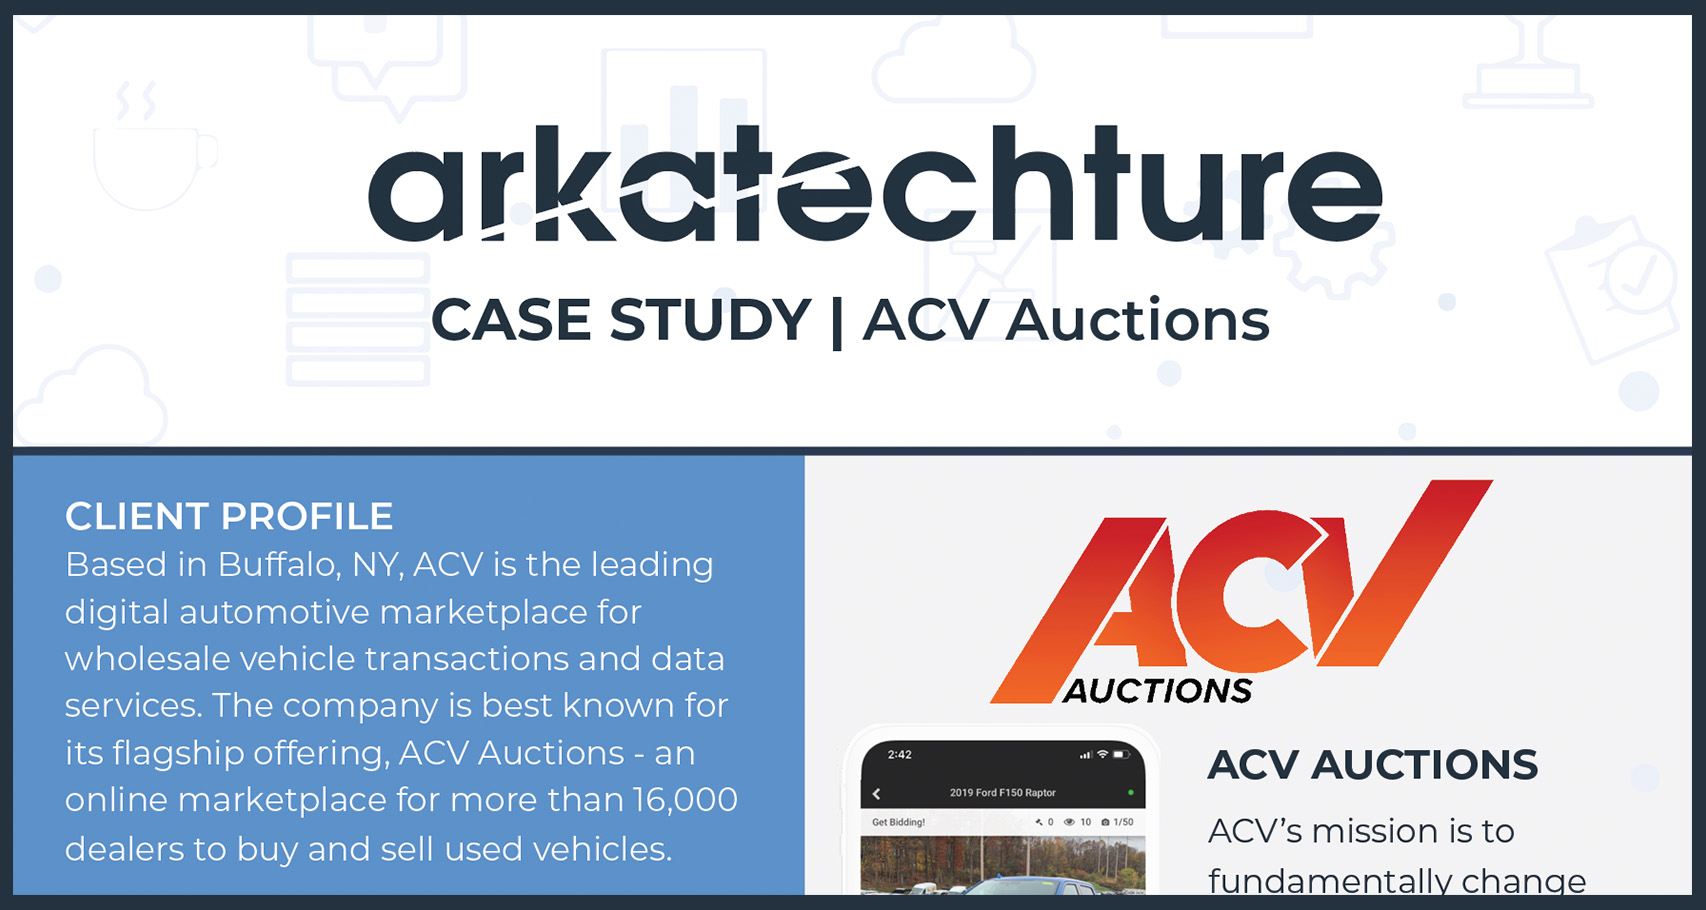 ACV Auctions' Partnership with Arkatechture